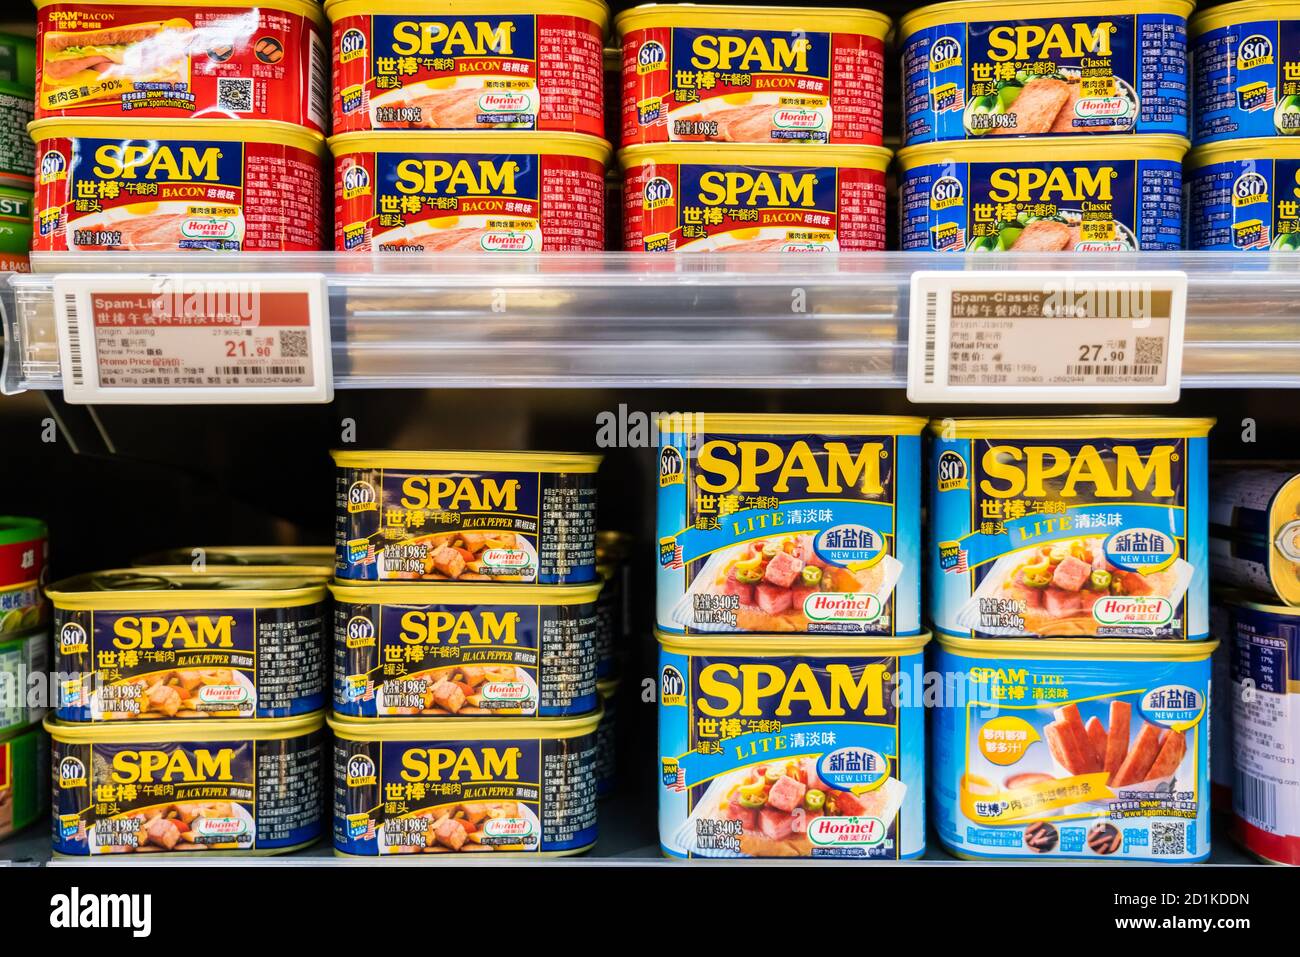 https://c8.alamy.com/comp/2D1KDDN/shenzhen-china-05th-oct-2020-spam-canned-cooked-pork-made-by-hormel-foods-corporation-seen-in-a-supermarket-credit-sopa-images-limitedalamy-live-news-2D1KDDN.jpg